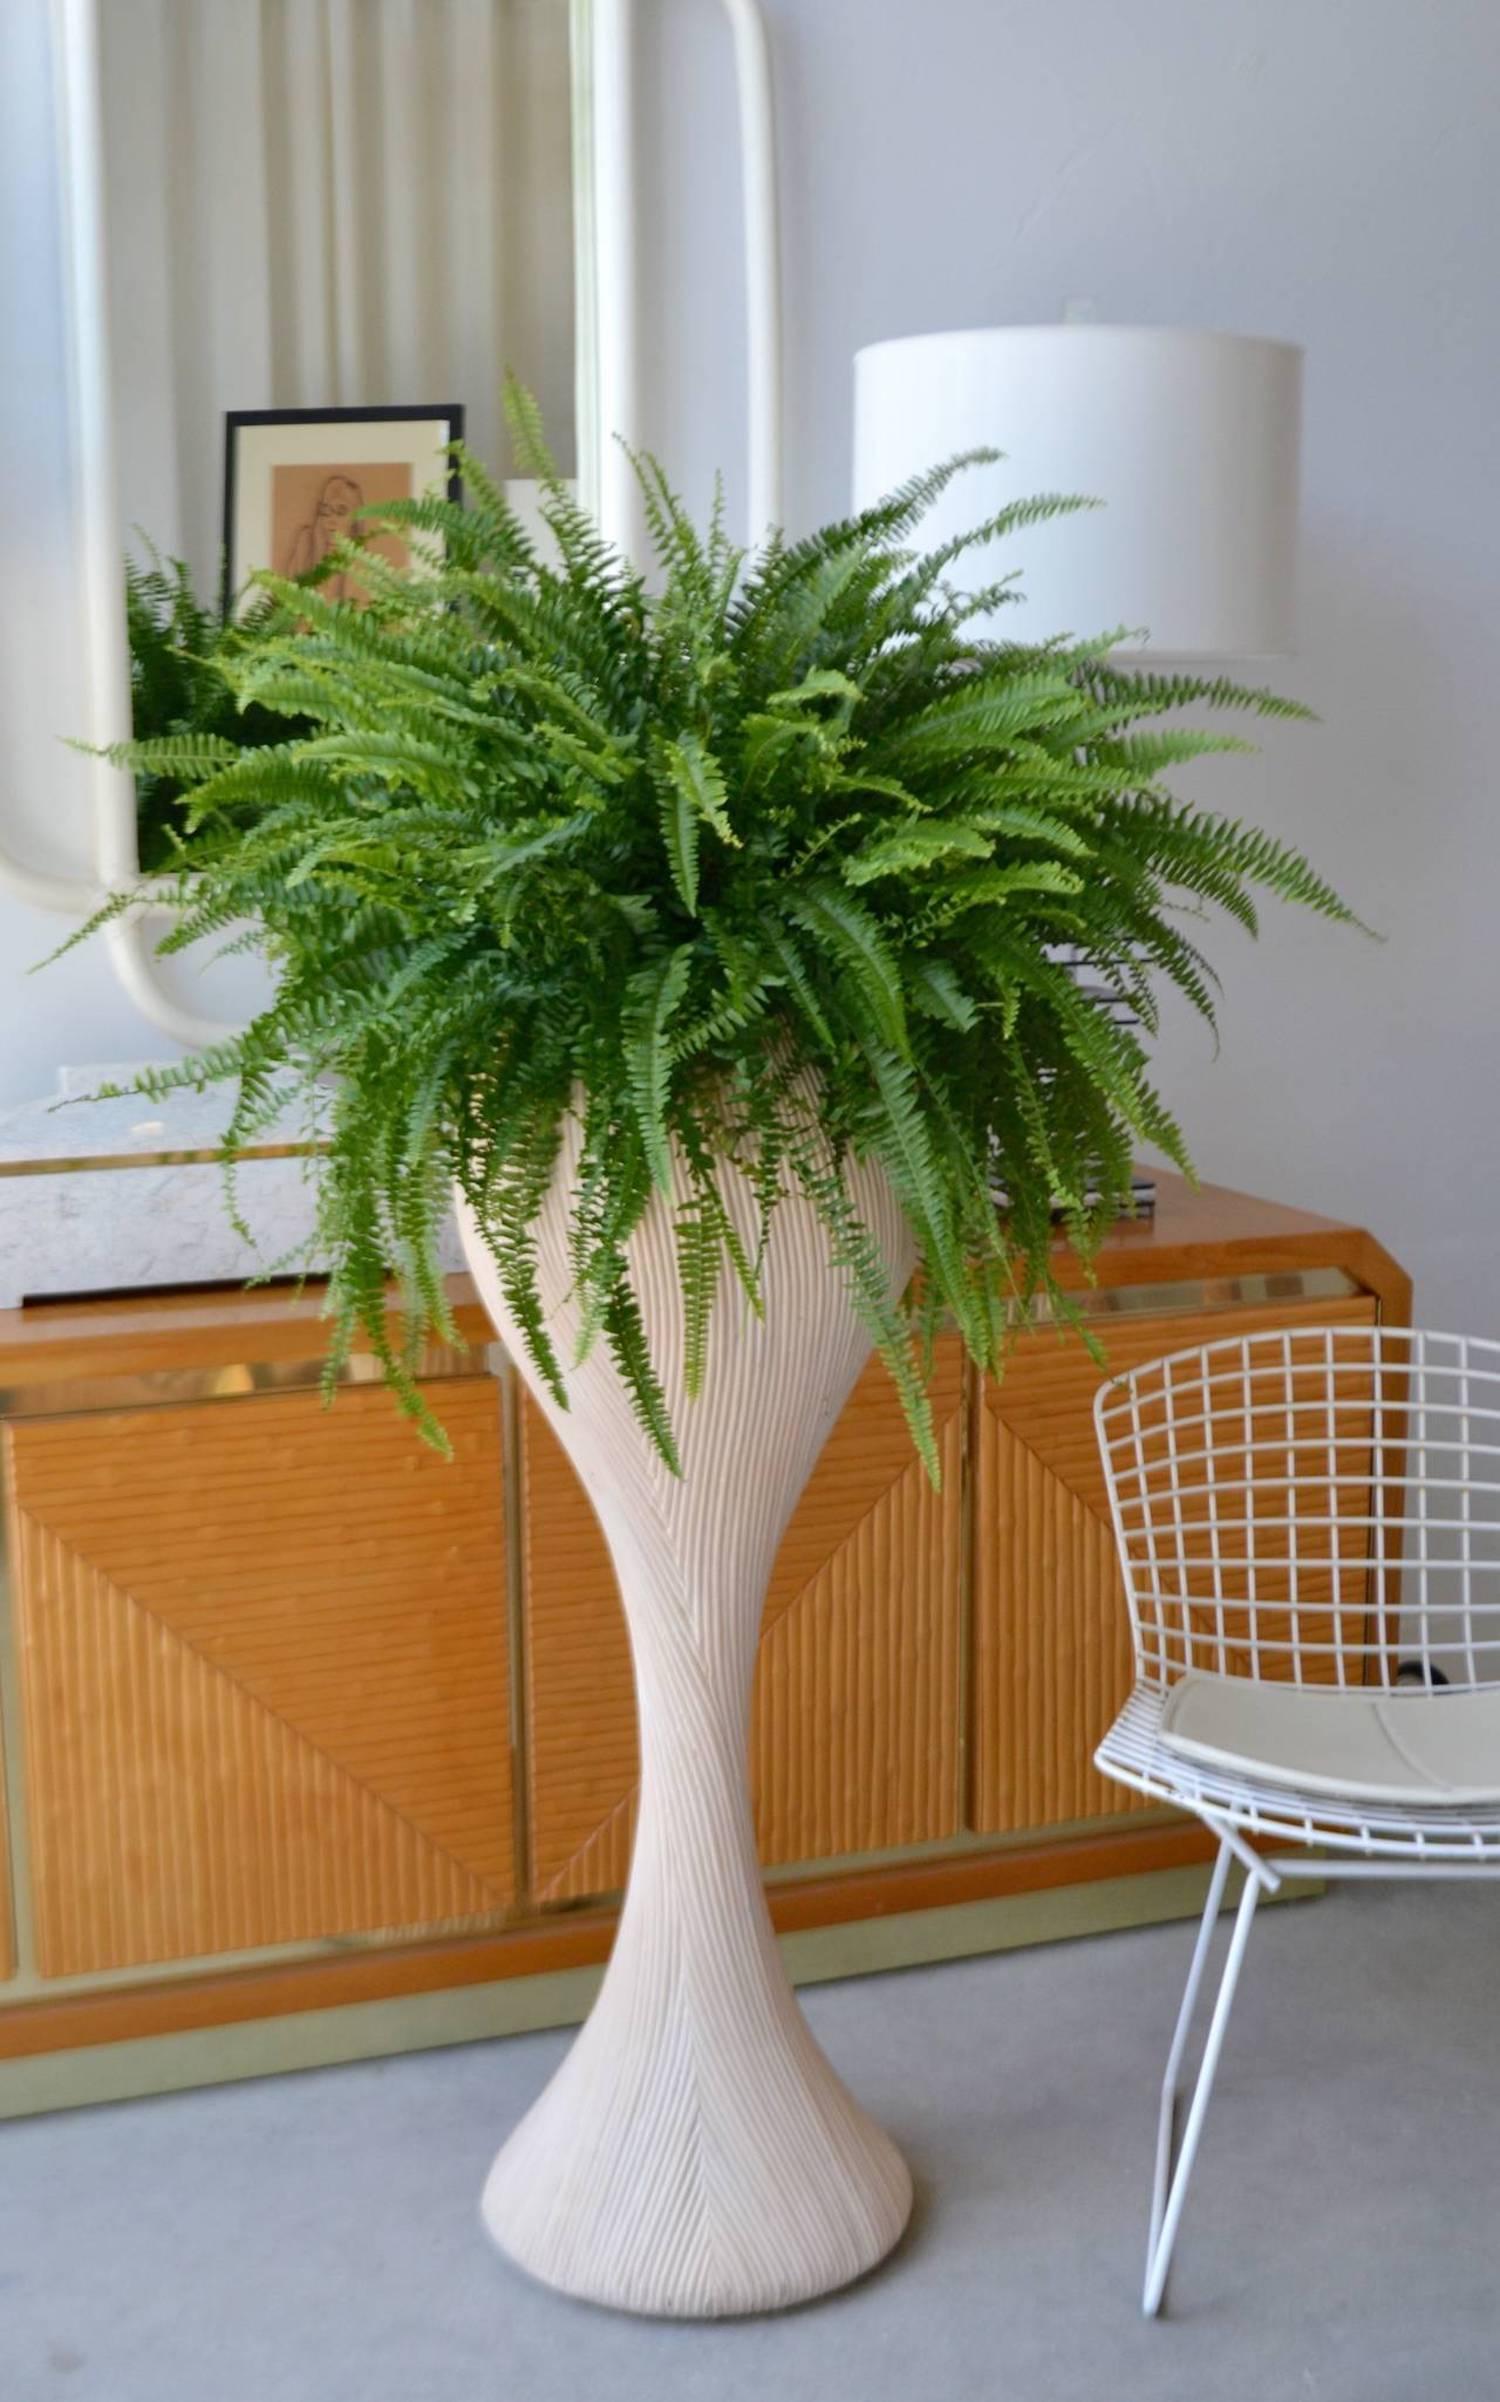 Sculptural cerused bent reed plant Stand, circa 1970s. This custom crafted pedestal / plant stand is exquisitely designed of applied cut reed strands over wooden form. 

Overall dimensions:

42.5